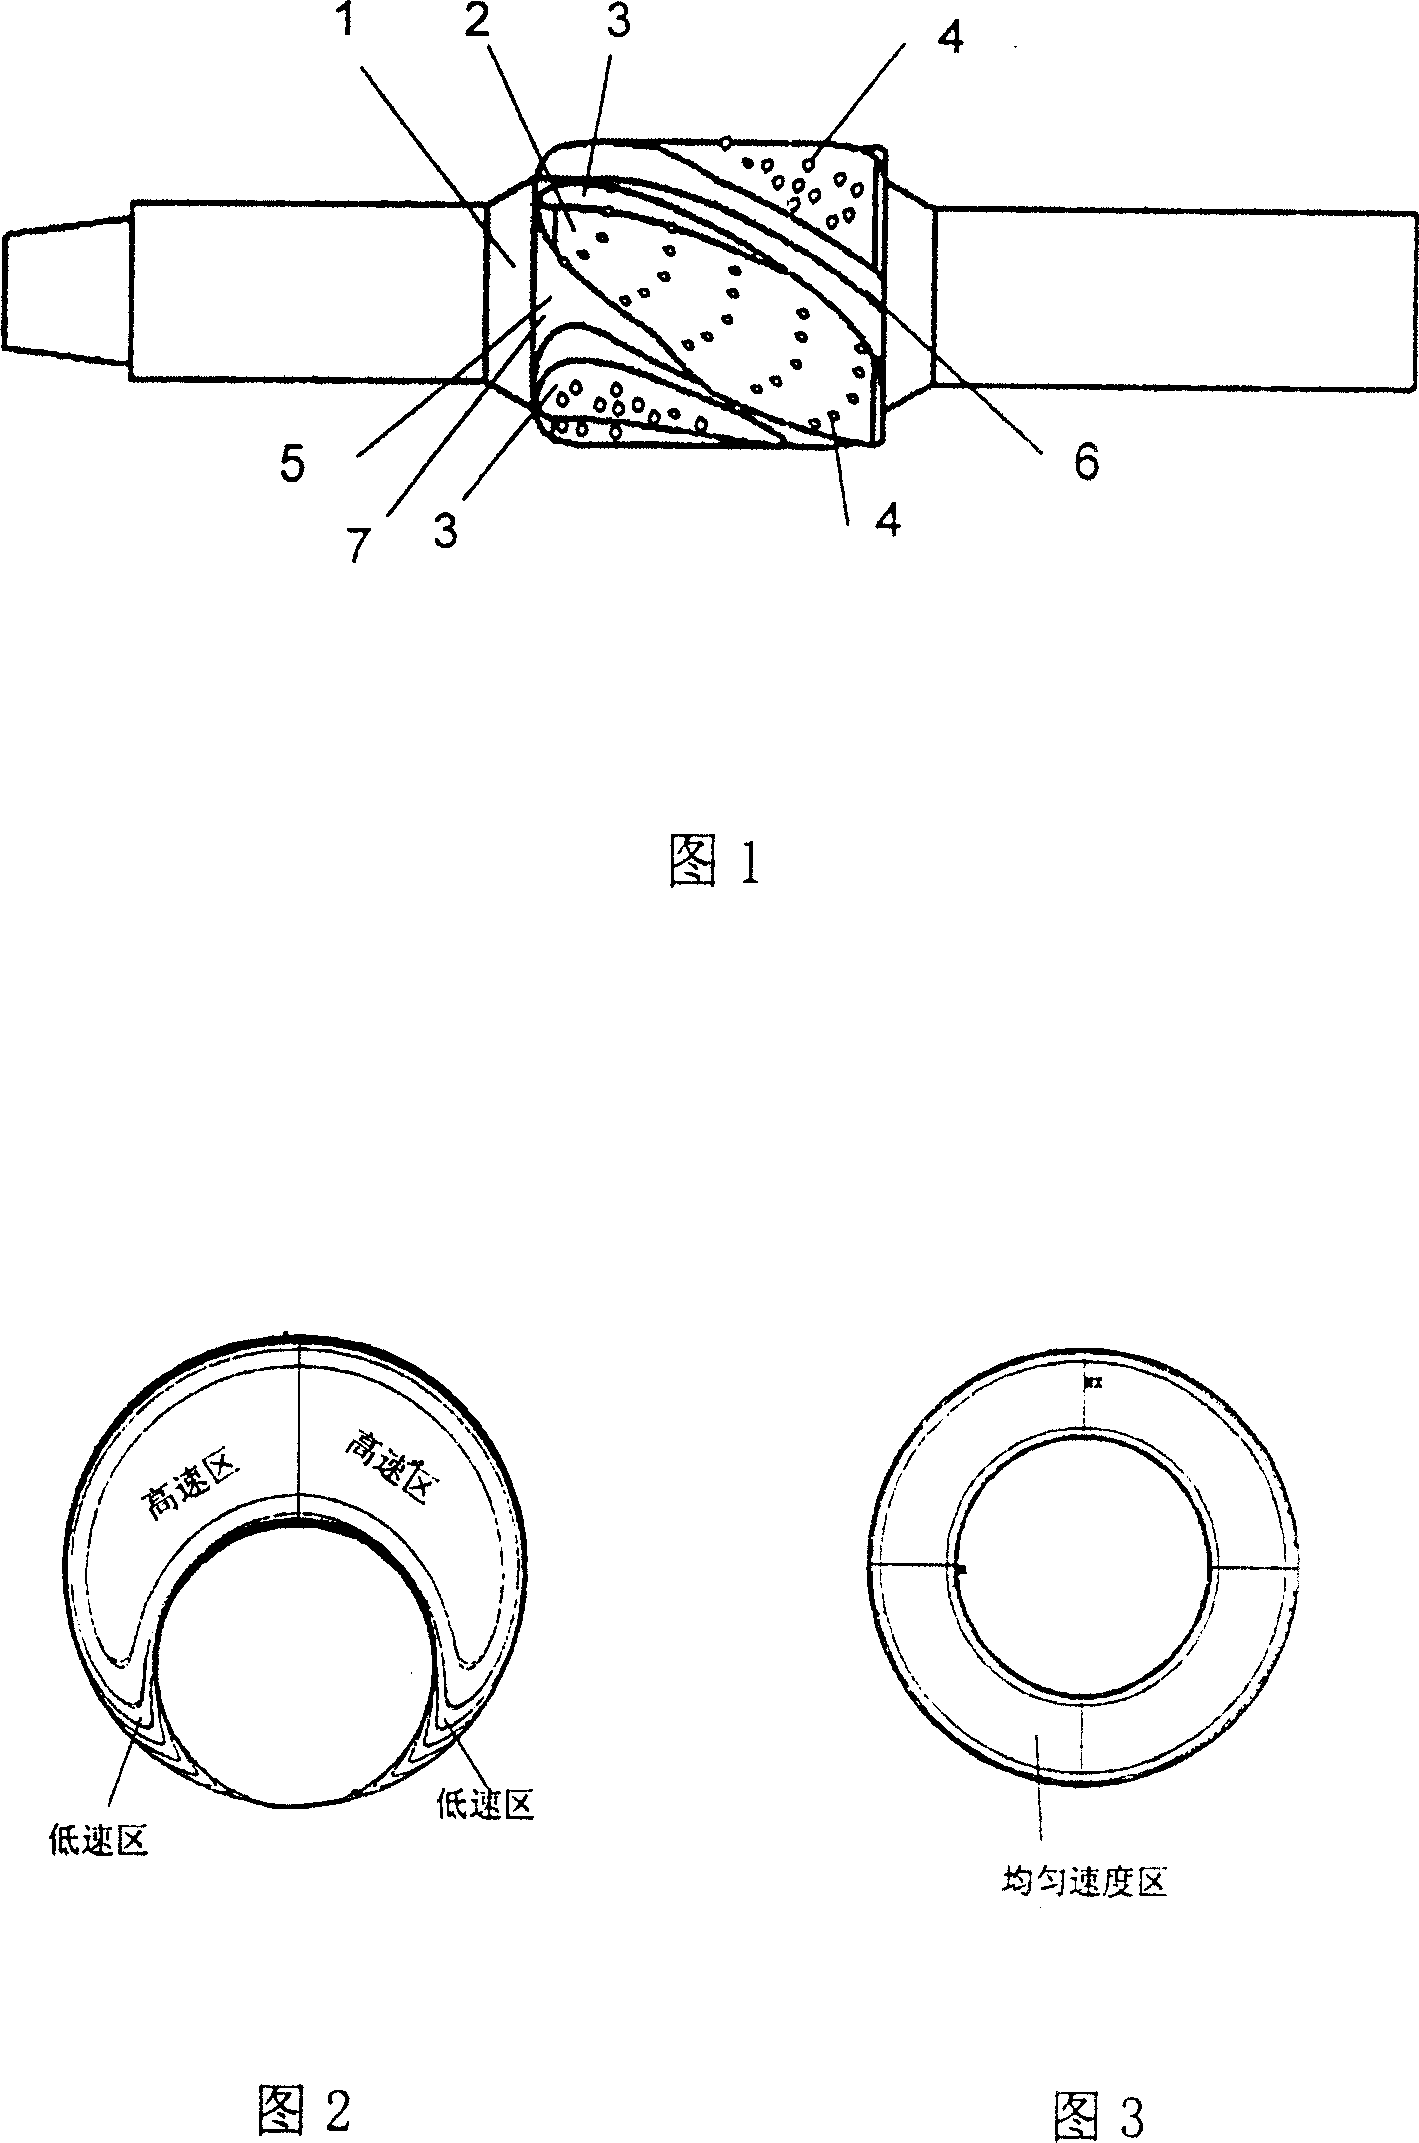 Stabilizer of gas drill horizontal well